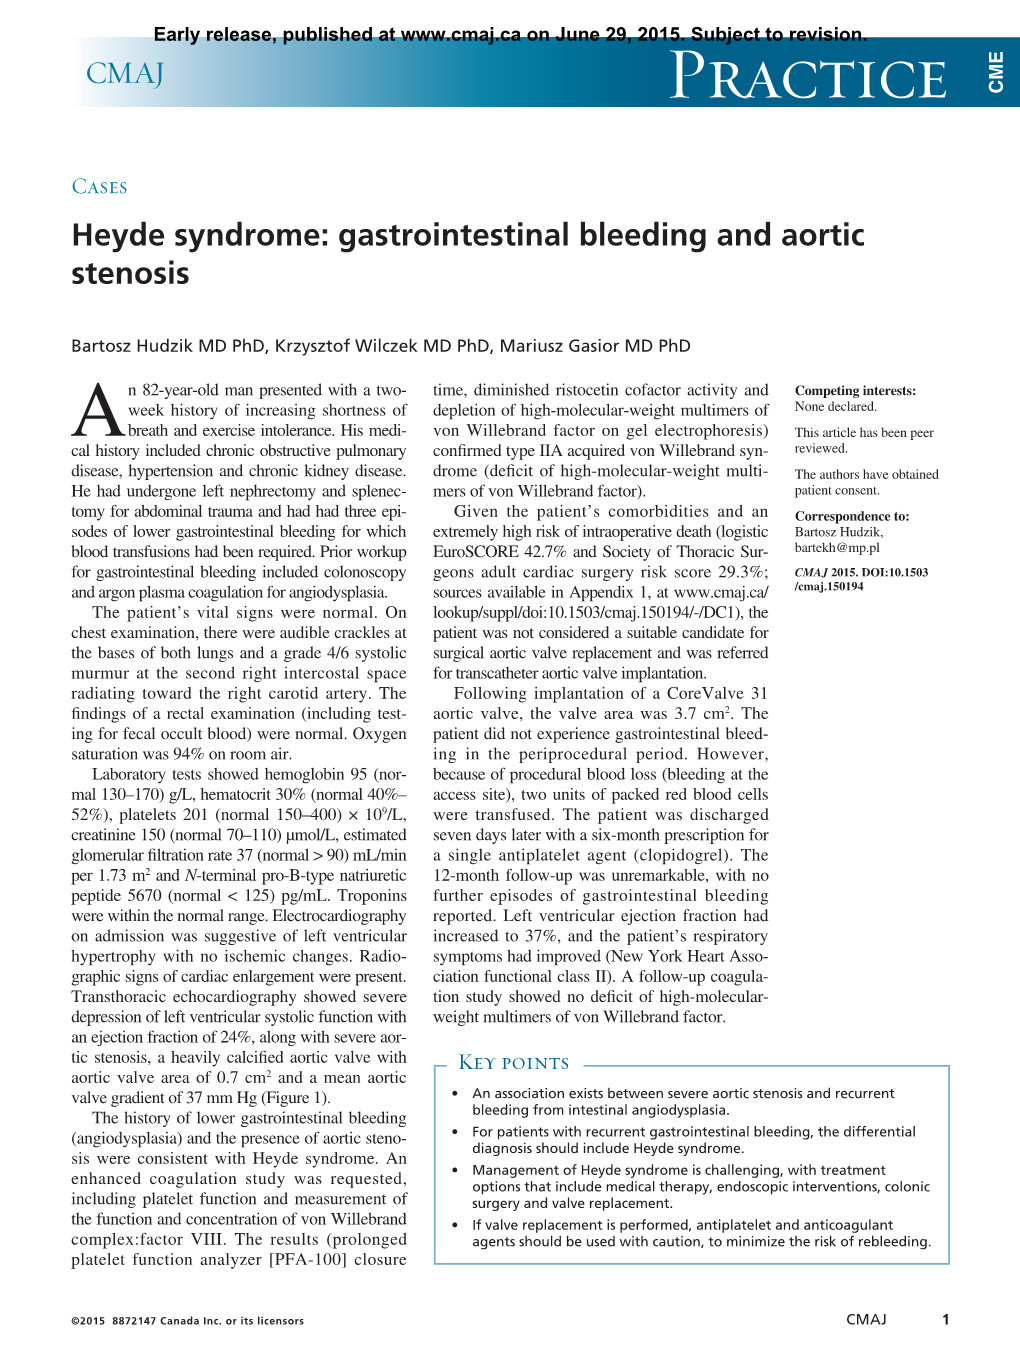 Heyde Syndrome: Gastrointestinal Bleeding and Aortic Stenosis